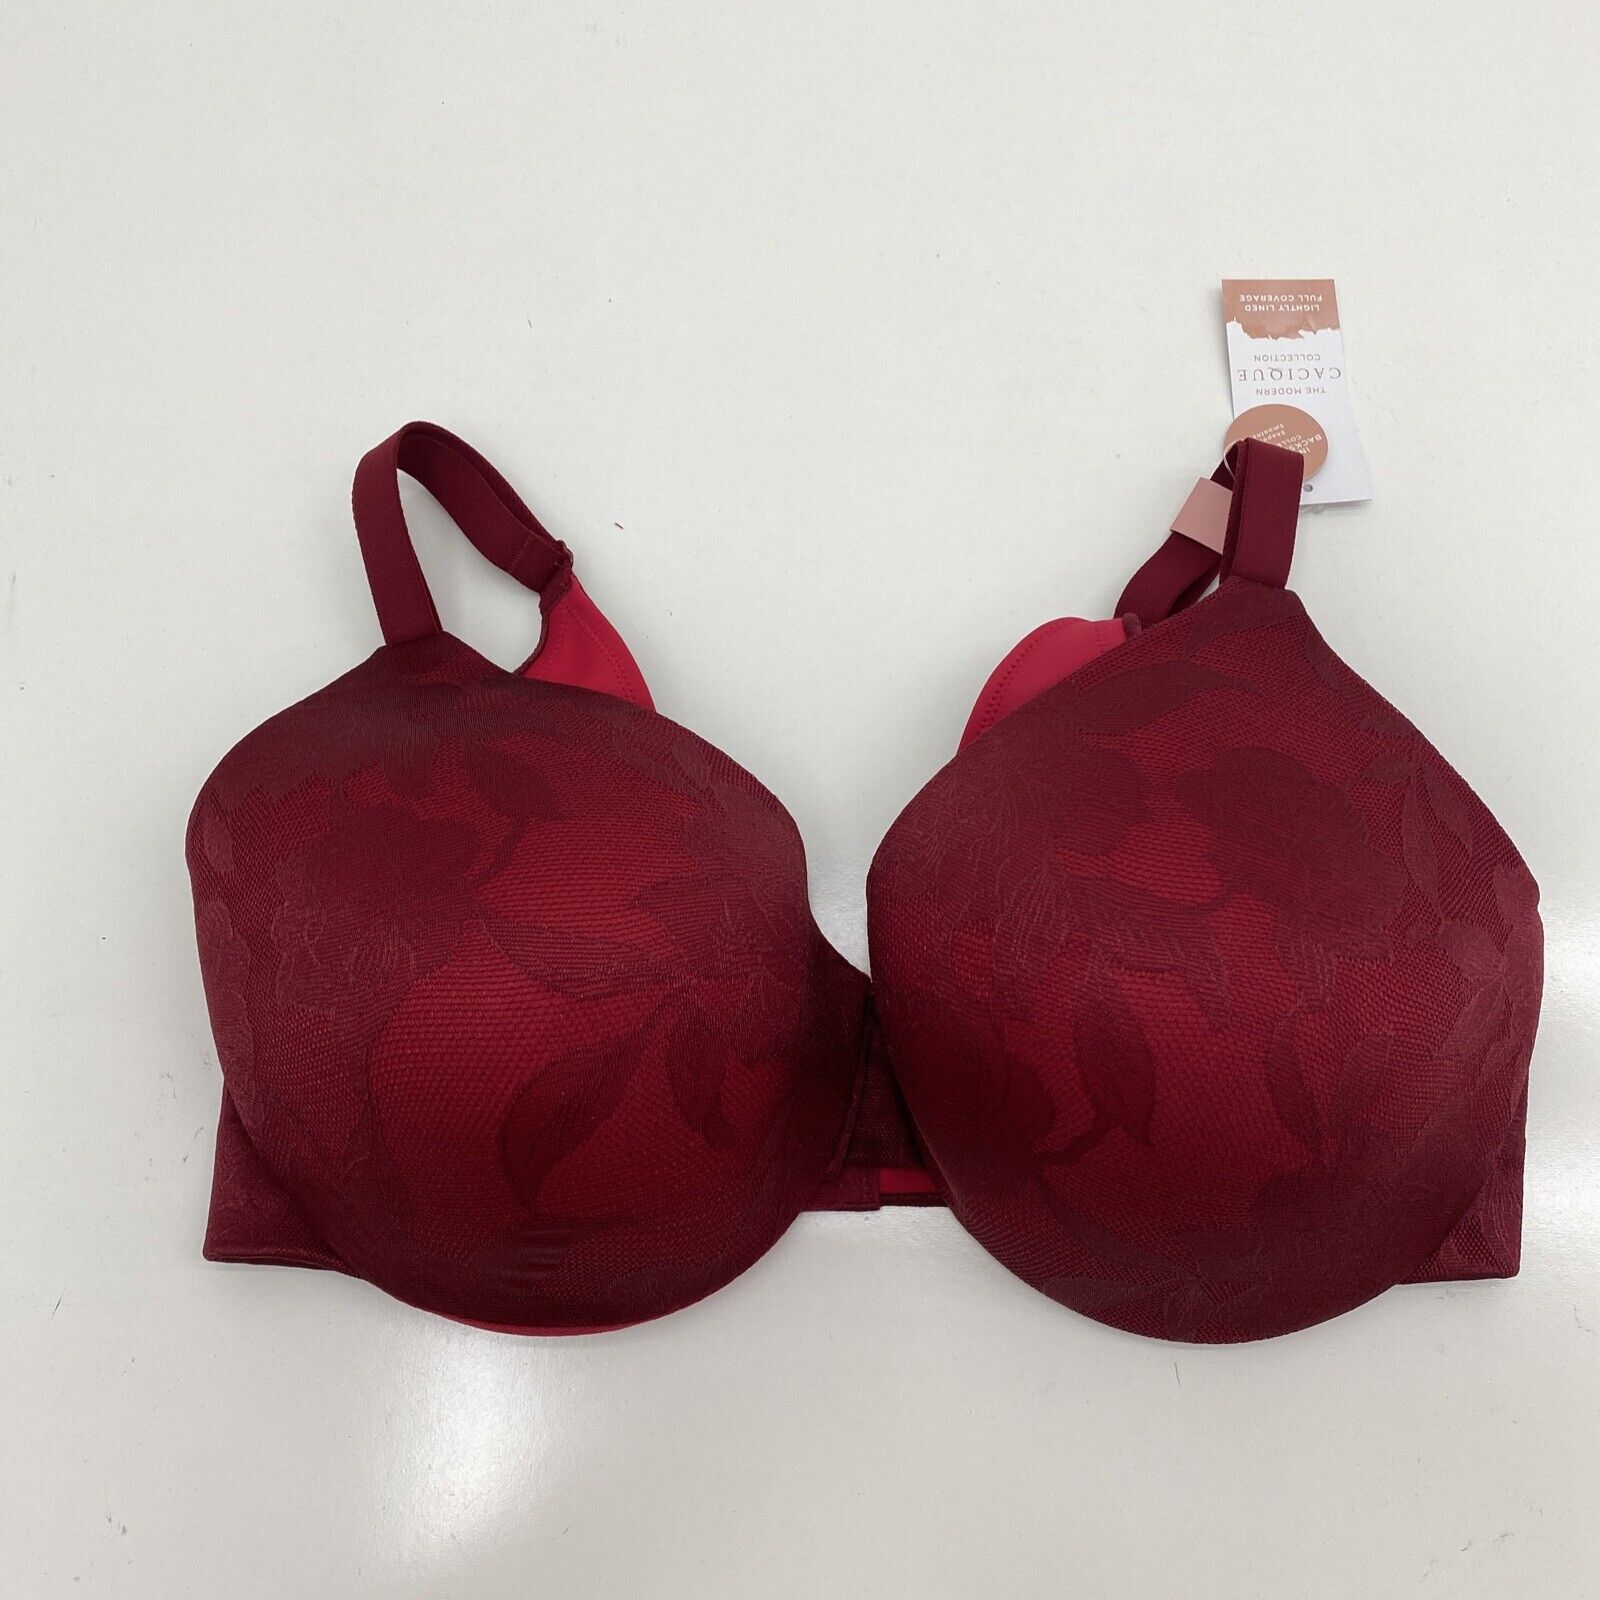 Lot of 2 Cacique Bras 40DD Red and Black Satin w/Lace Rhinestones Damask